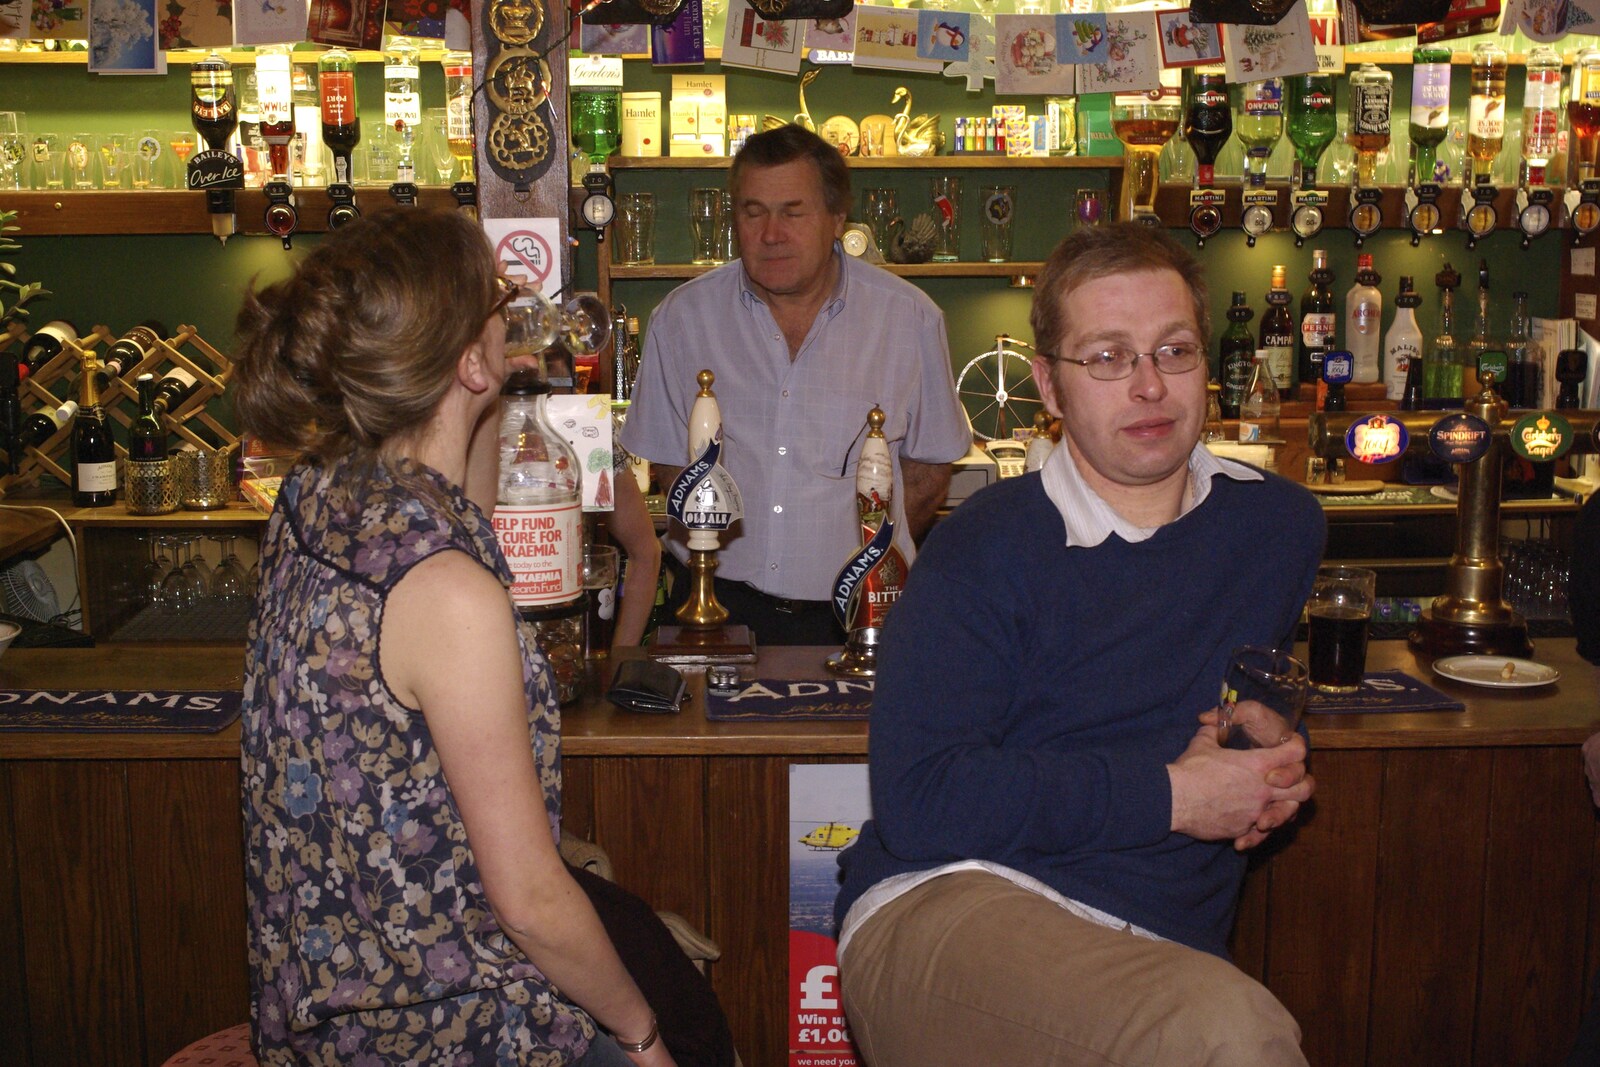 New Year Trips to the Swan Inn, Brome, Suffolk - 6th January 2009: Suey and Marc at the bar